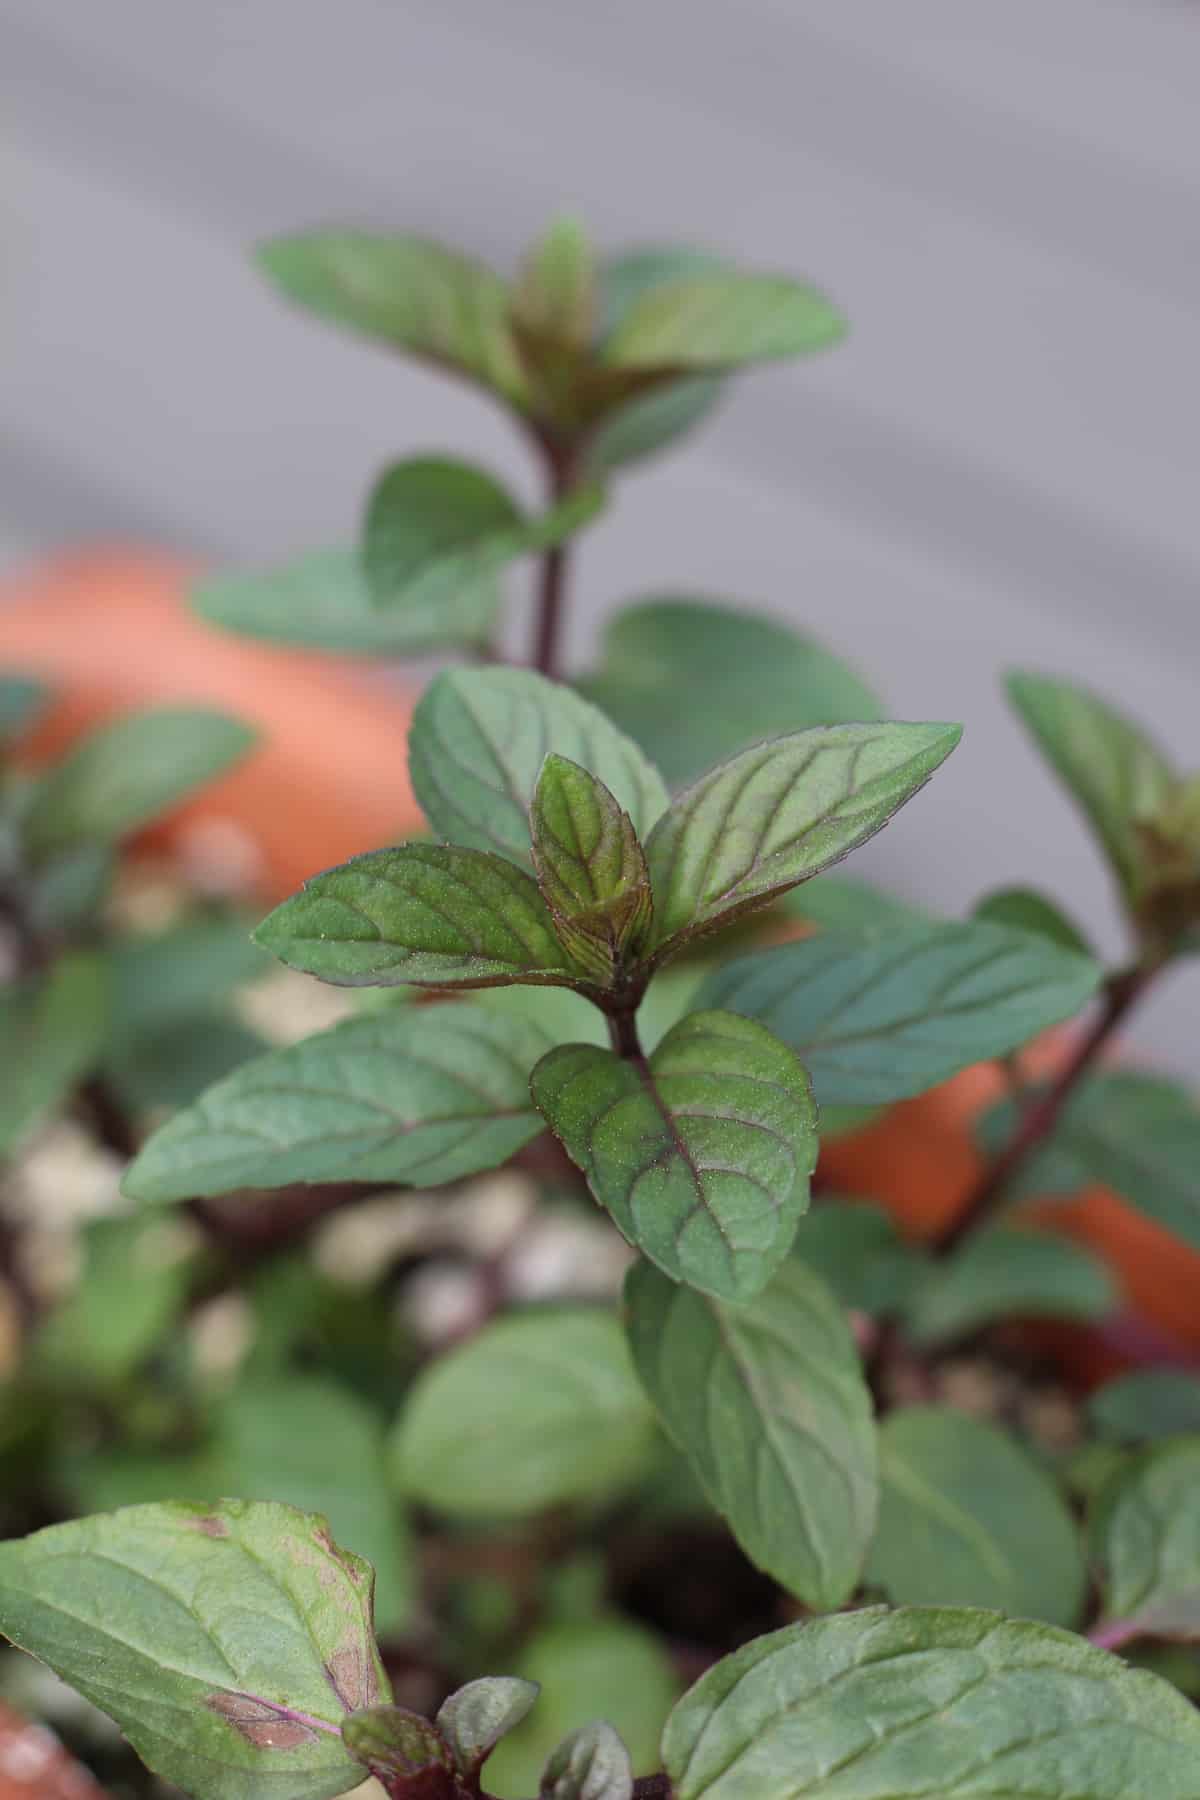 Peppermint grown in tabletop terra cotta container